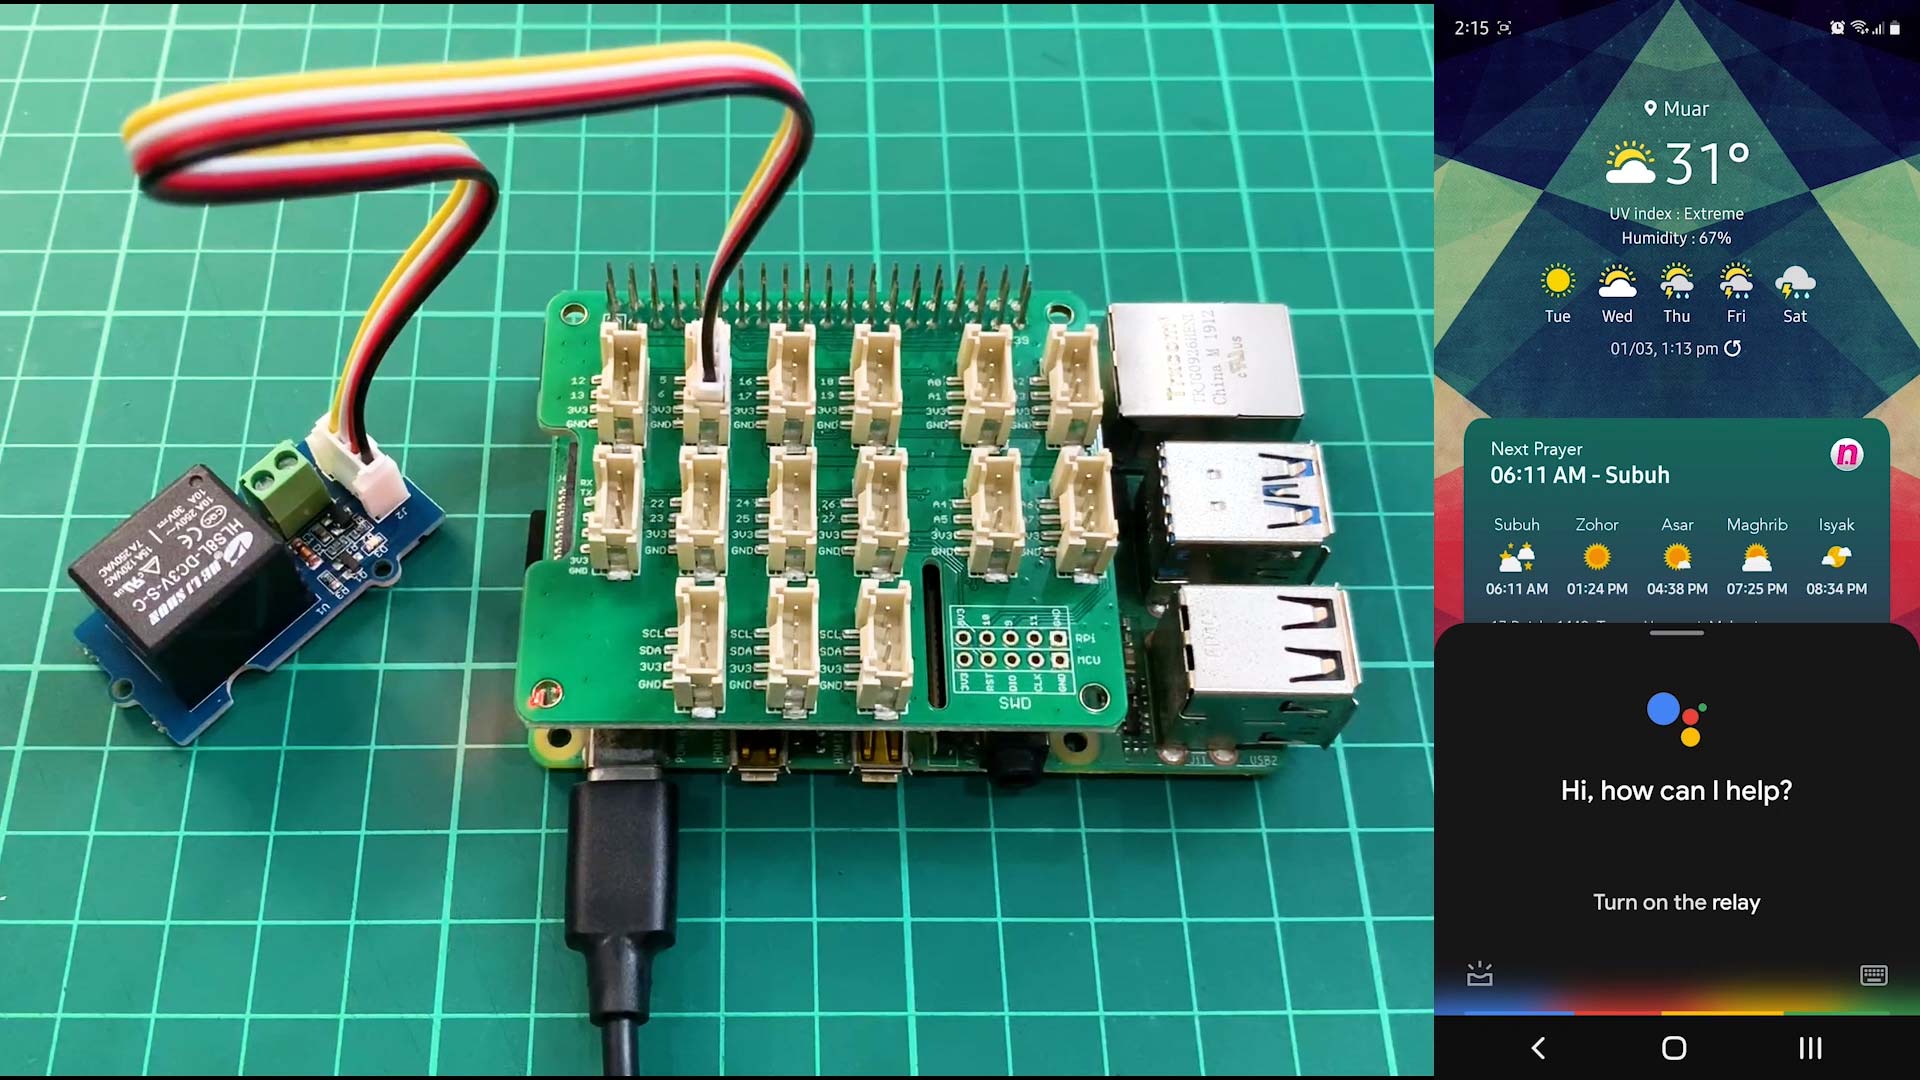 Google Assistant Controlled Raspberry Pi GPIO With IFTTT and Adafruit IO